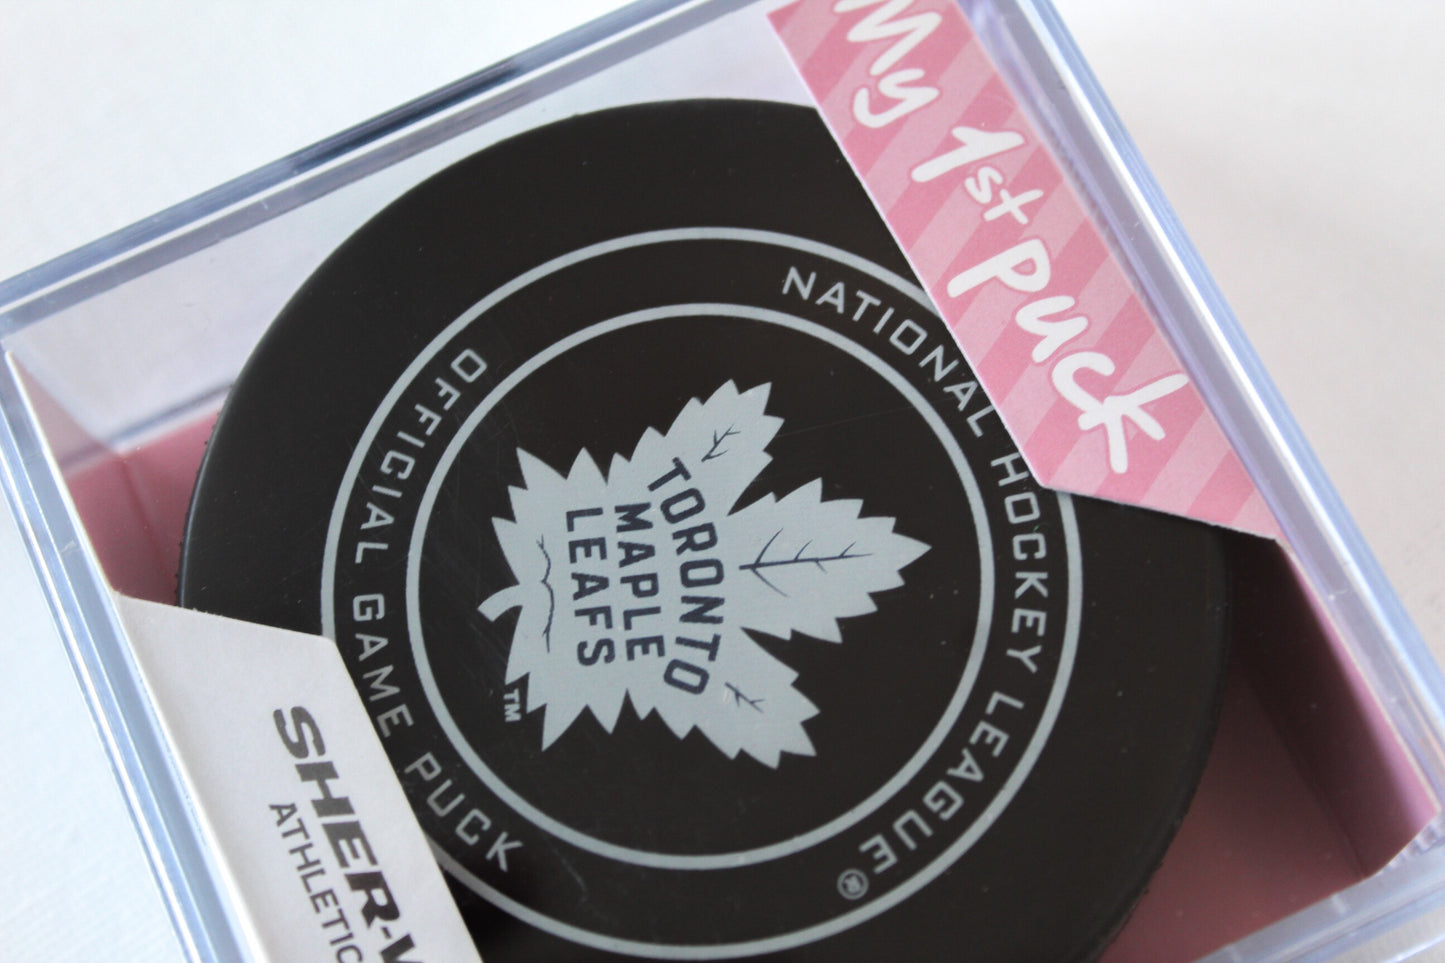 Inglasco My First Puck Pink Game Cube